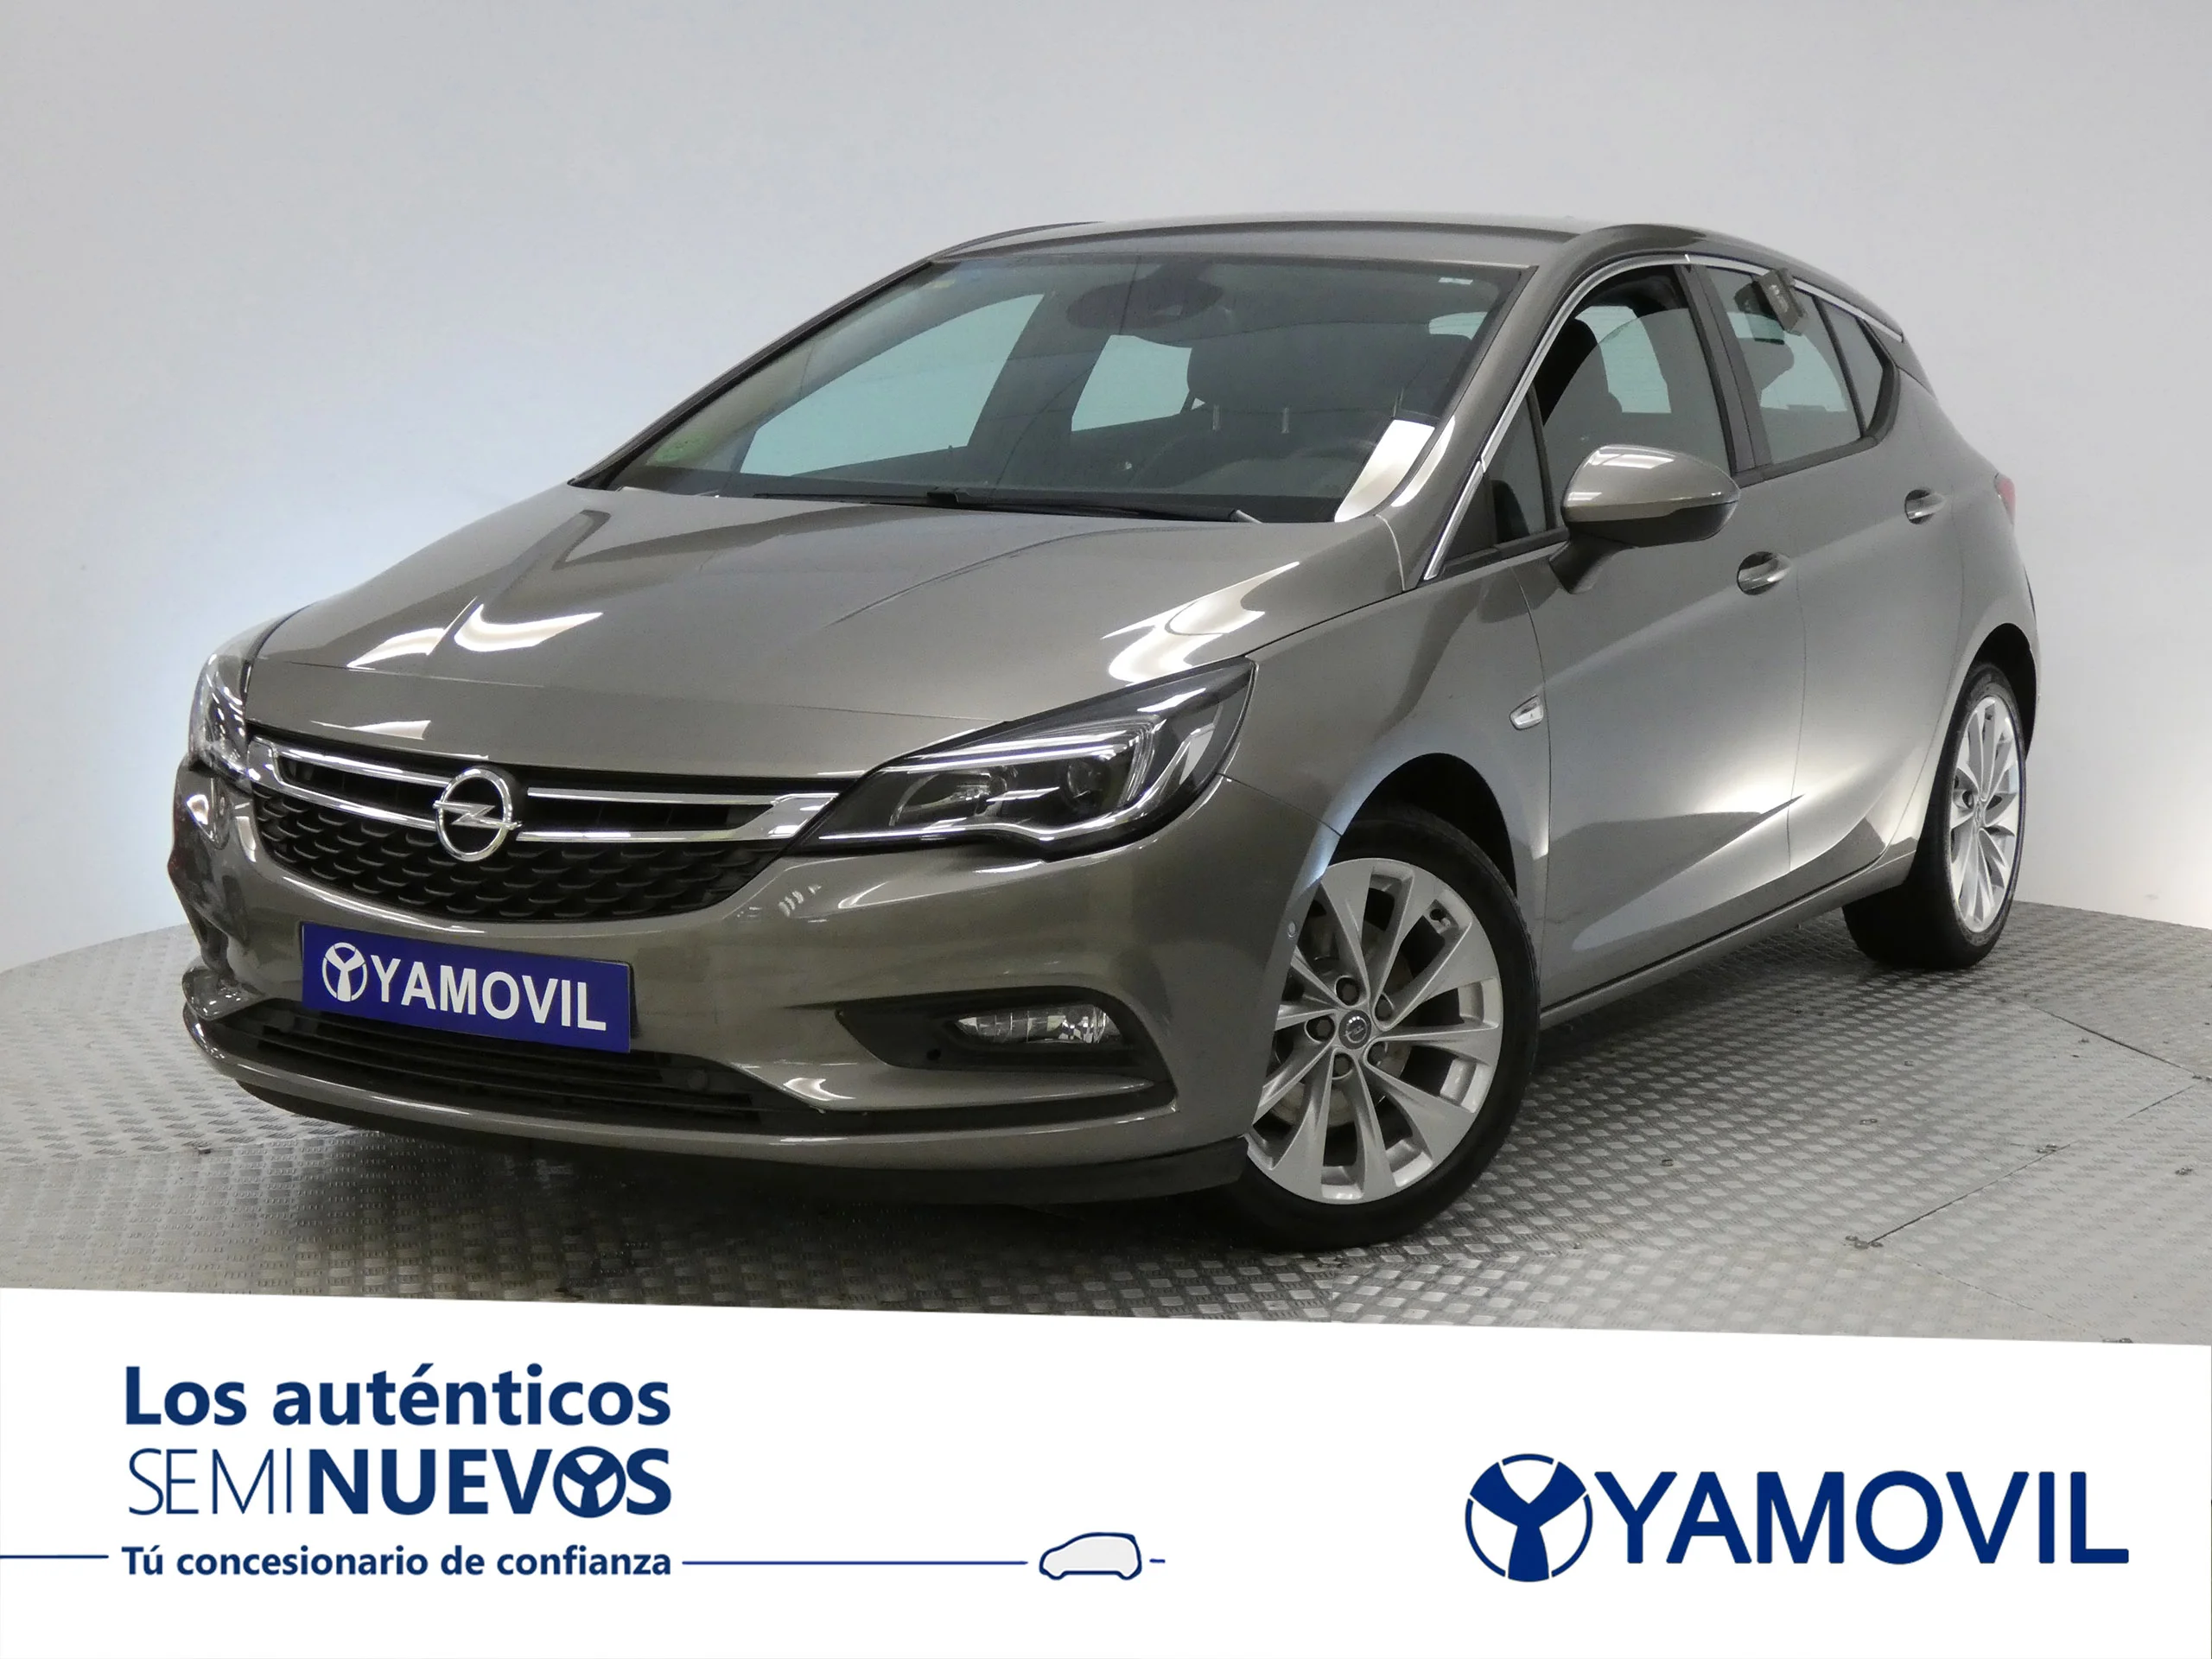 Opel Astra 1.6 CDTI EXCELLENCE 5P - Foto 1